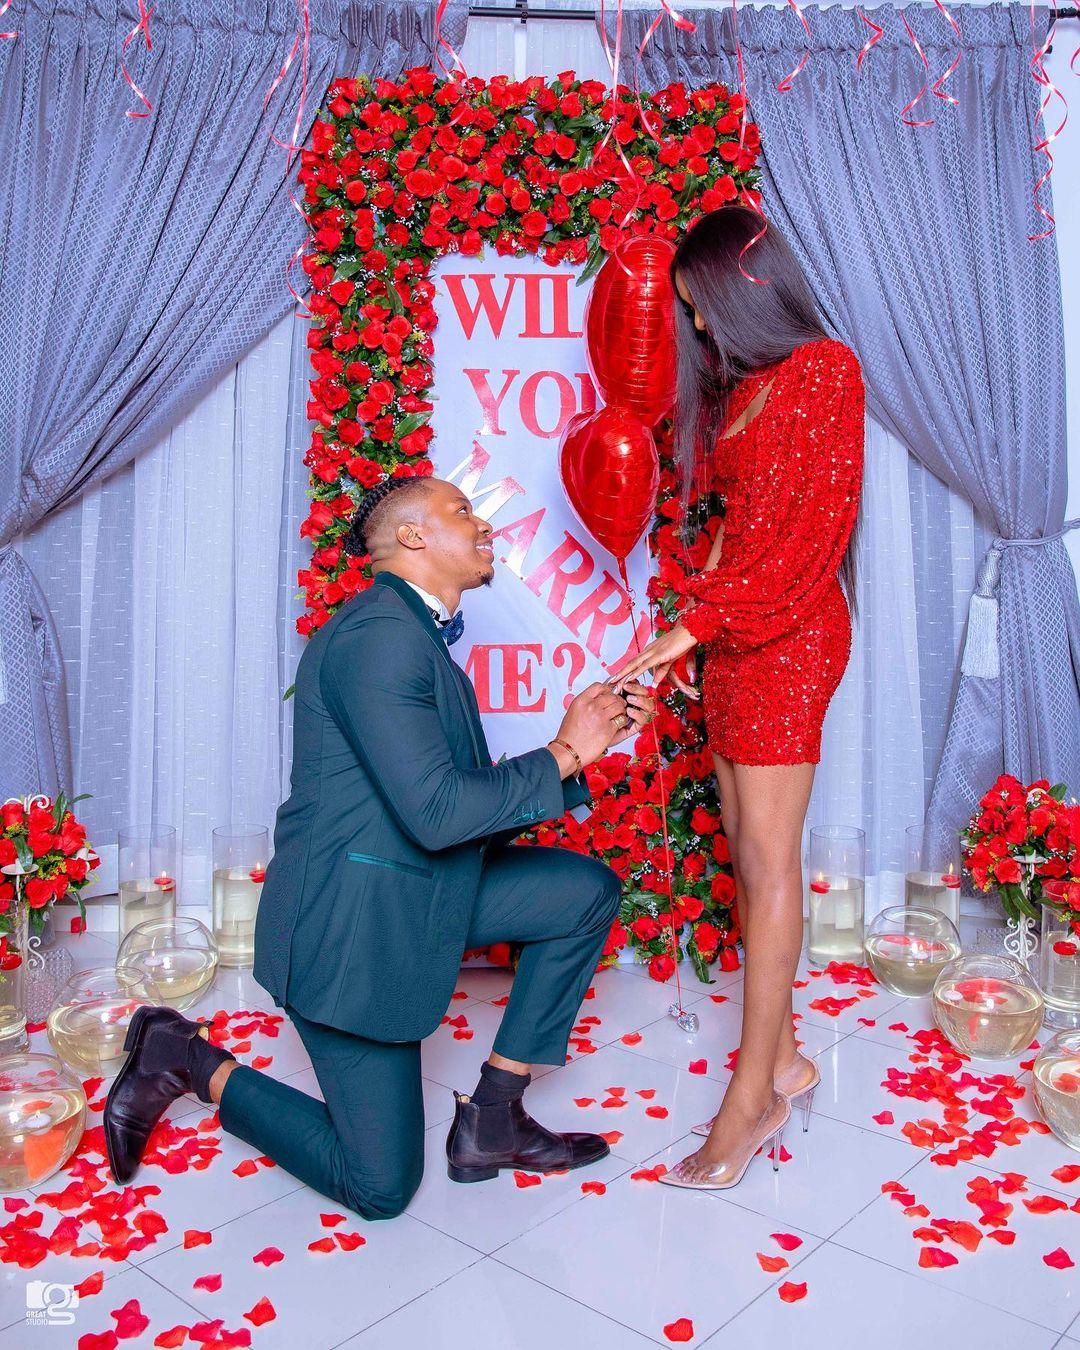 Ultimate Love star, Iyke reveals why he proposed to his girlfriend, Theresa (Video)